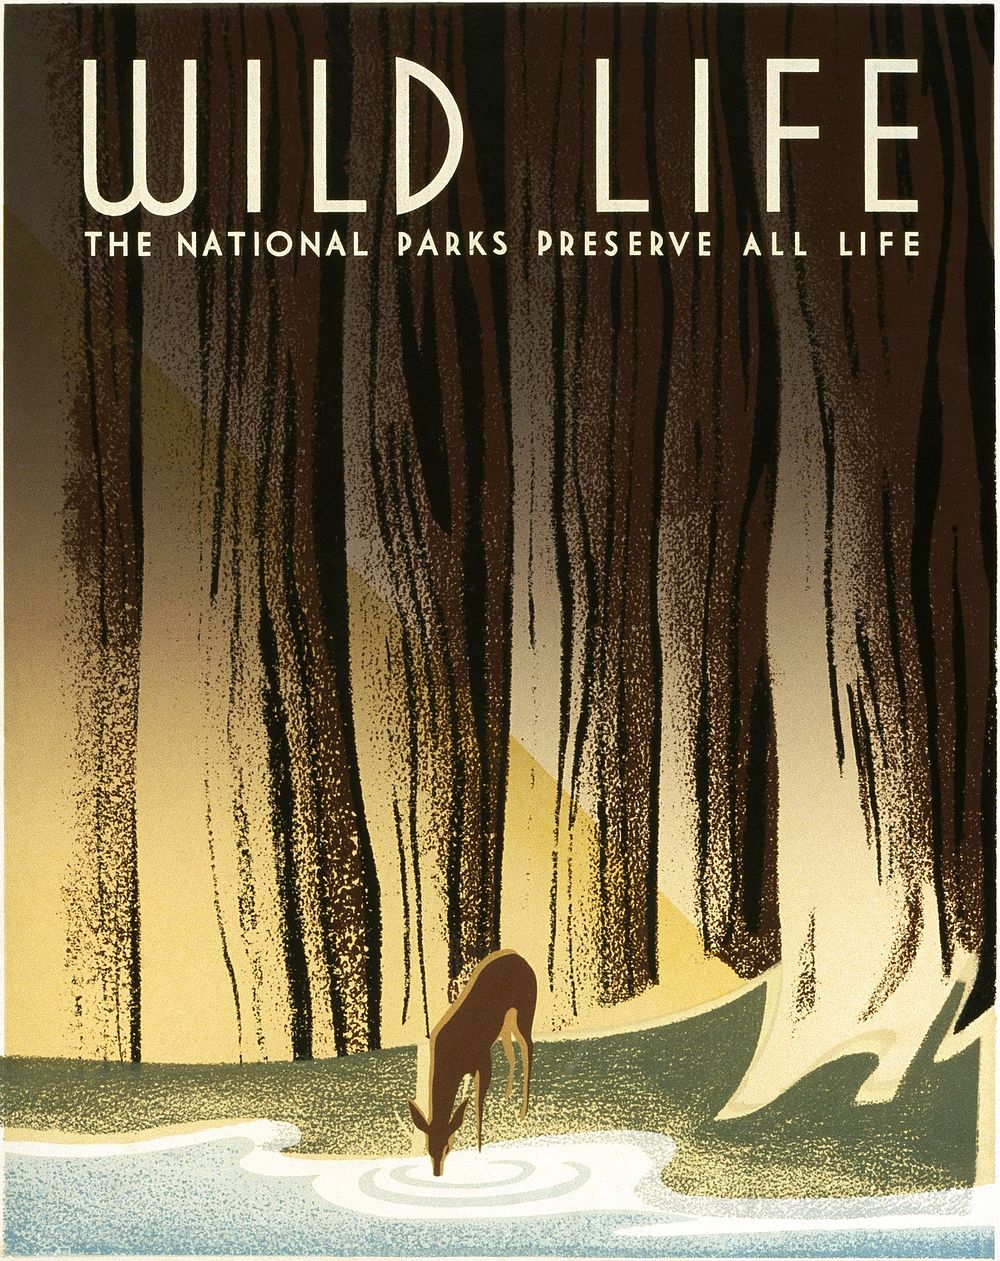 "Wild life The national parks preserve all life." Poster for United States National Park Service, showing a deer drinking…